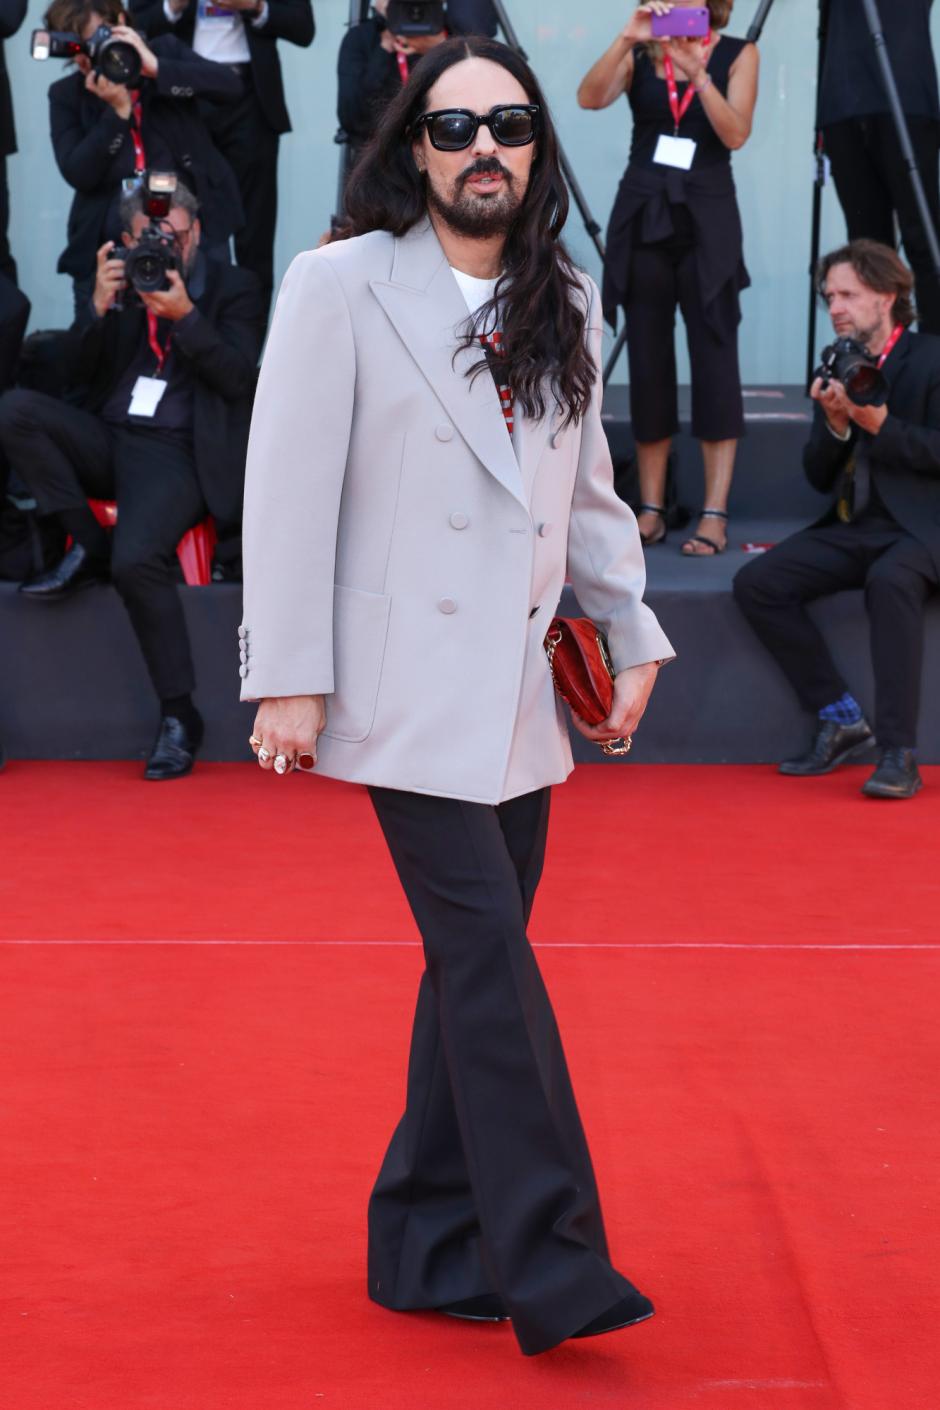 Designer Alessandro Michele at the premiere of the film 'Don't Worry Darling' during the 79th edition of the Venice Film Festival in Venice, Italy, Monday, Sept. 5, 2022.